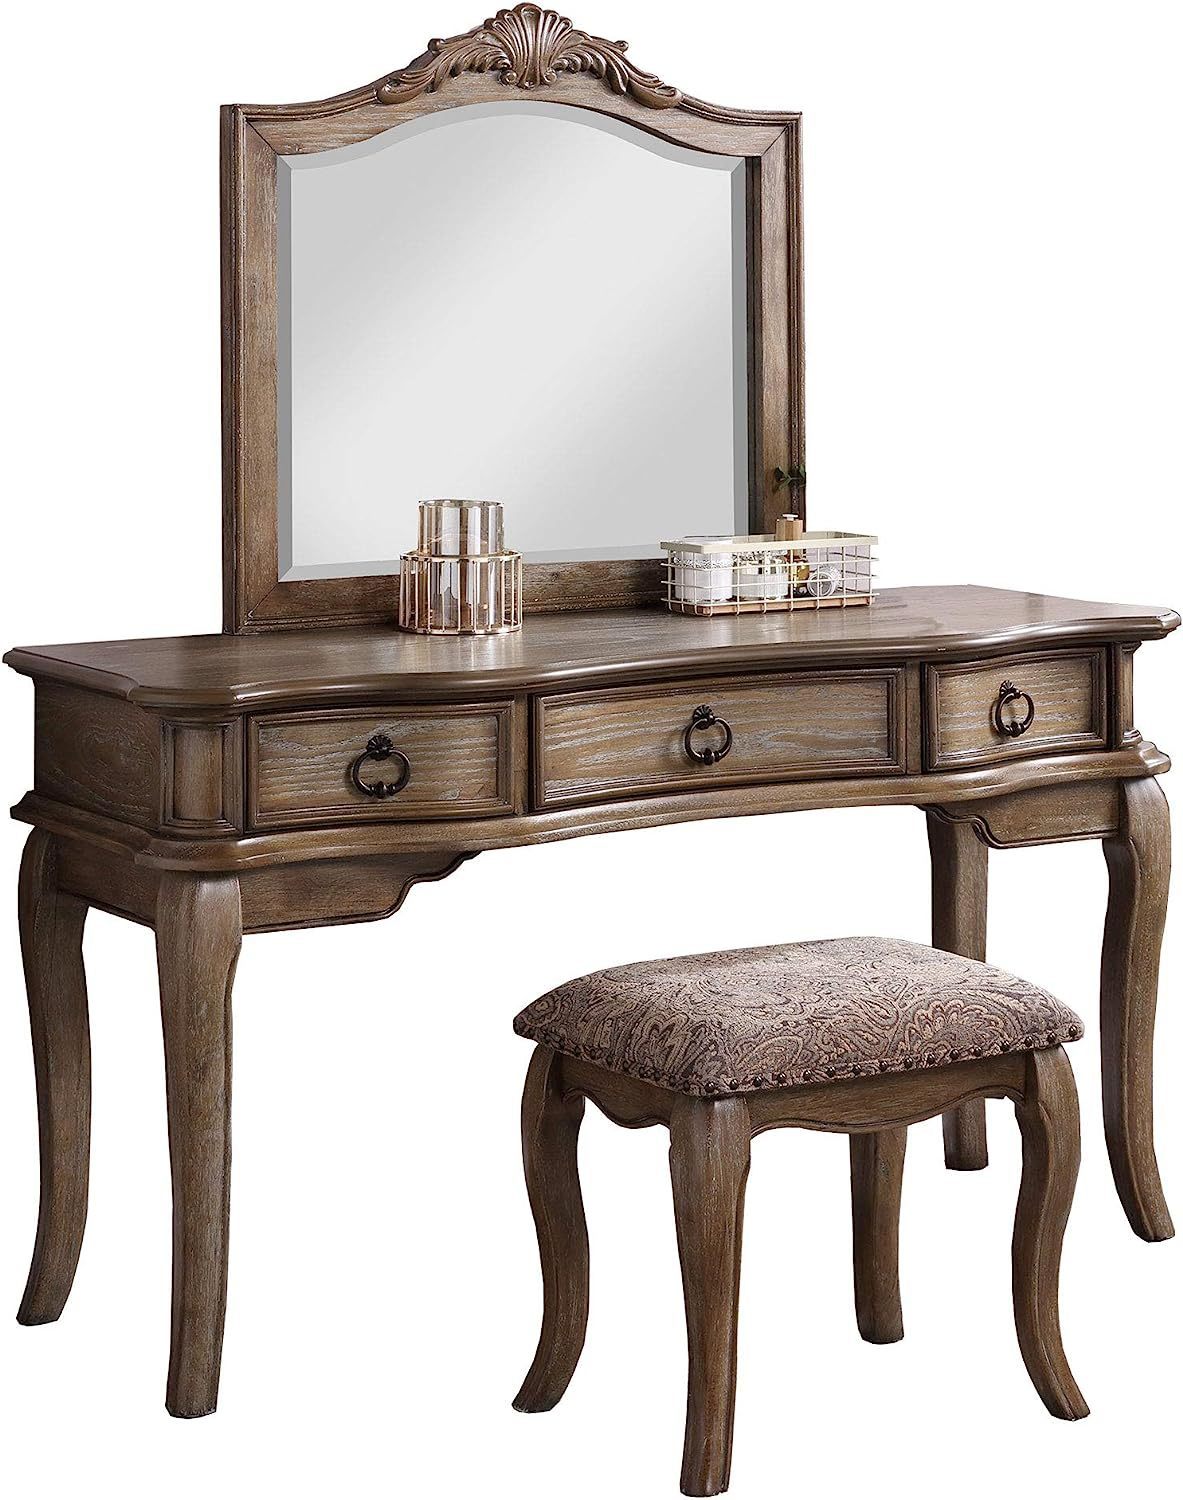 Contemporary Antique Oak Color Vanity Set with Stool Retro Style Drawers Cabriole-tapered Legs Mirror with Floral Crown Molding